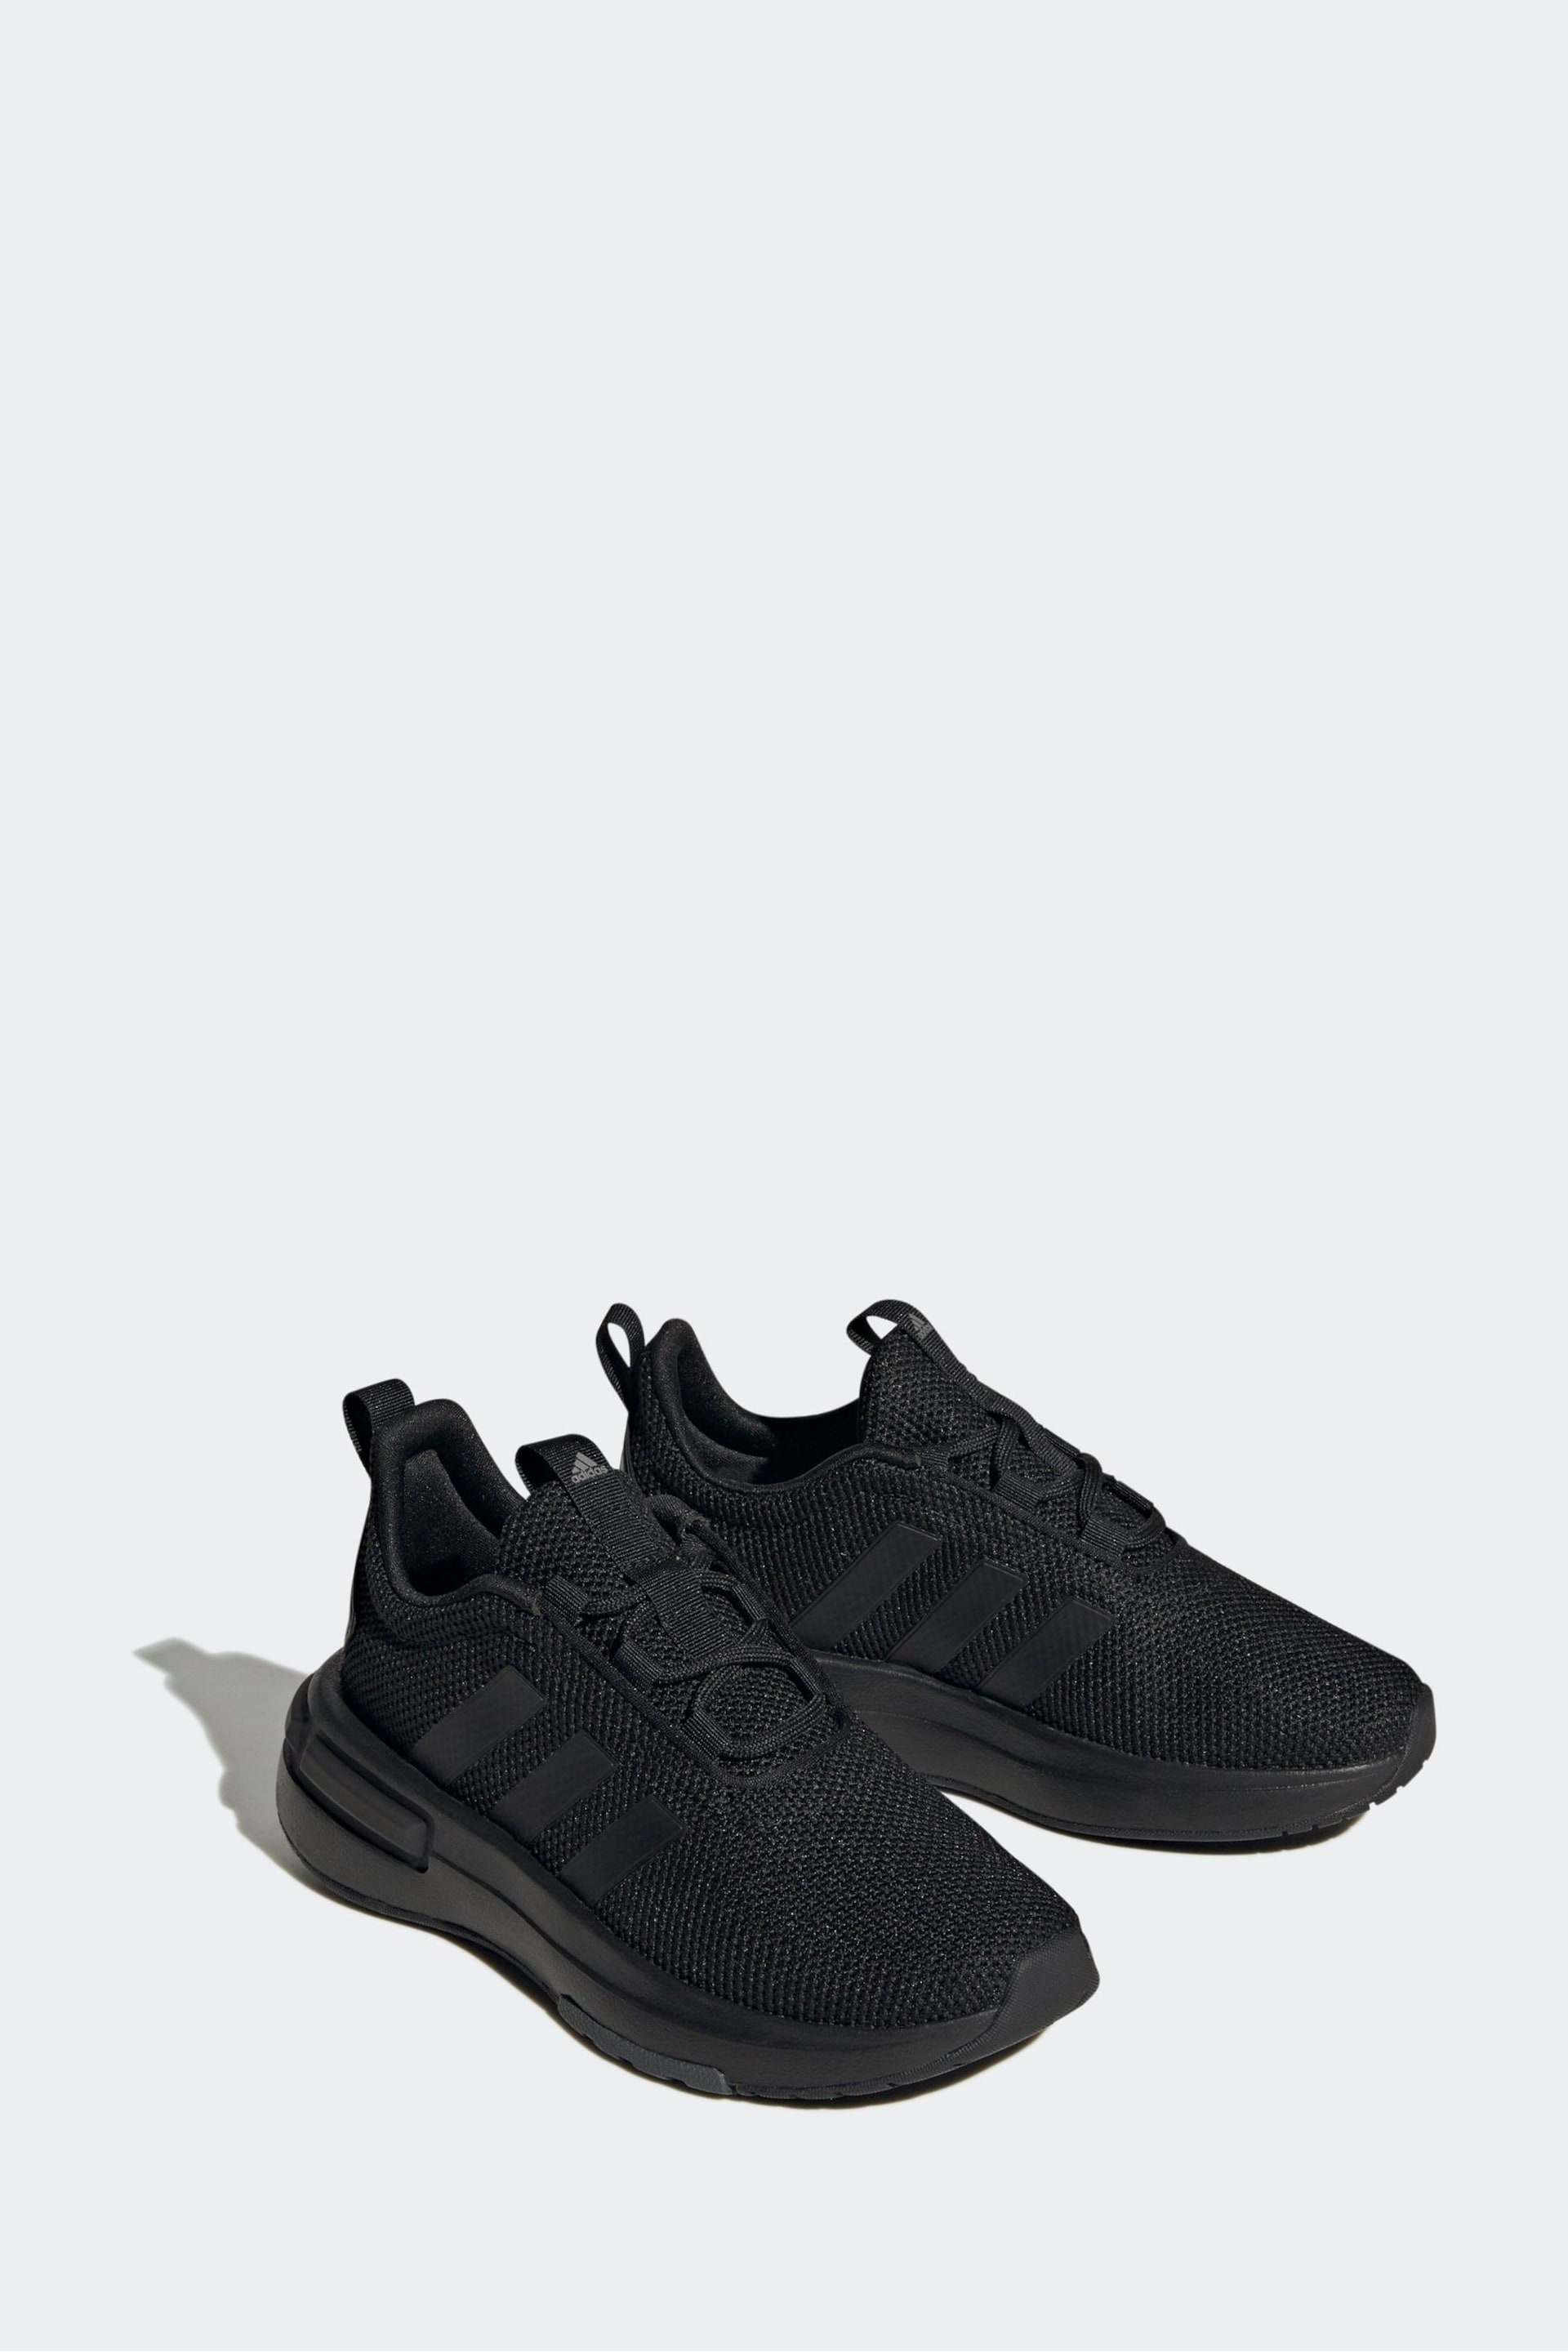 adidas Black Kids Racer TR23 Shoes - Image 2 of 8